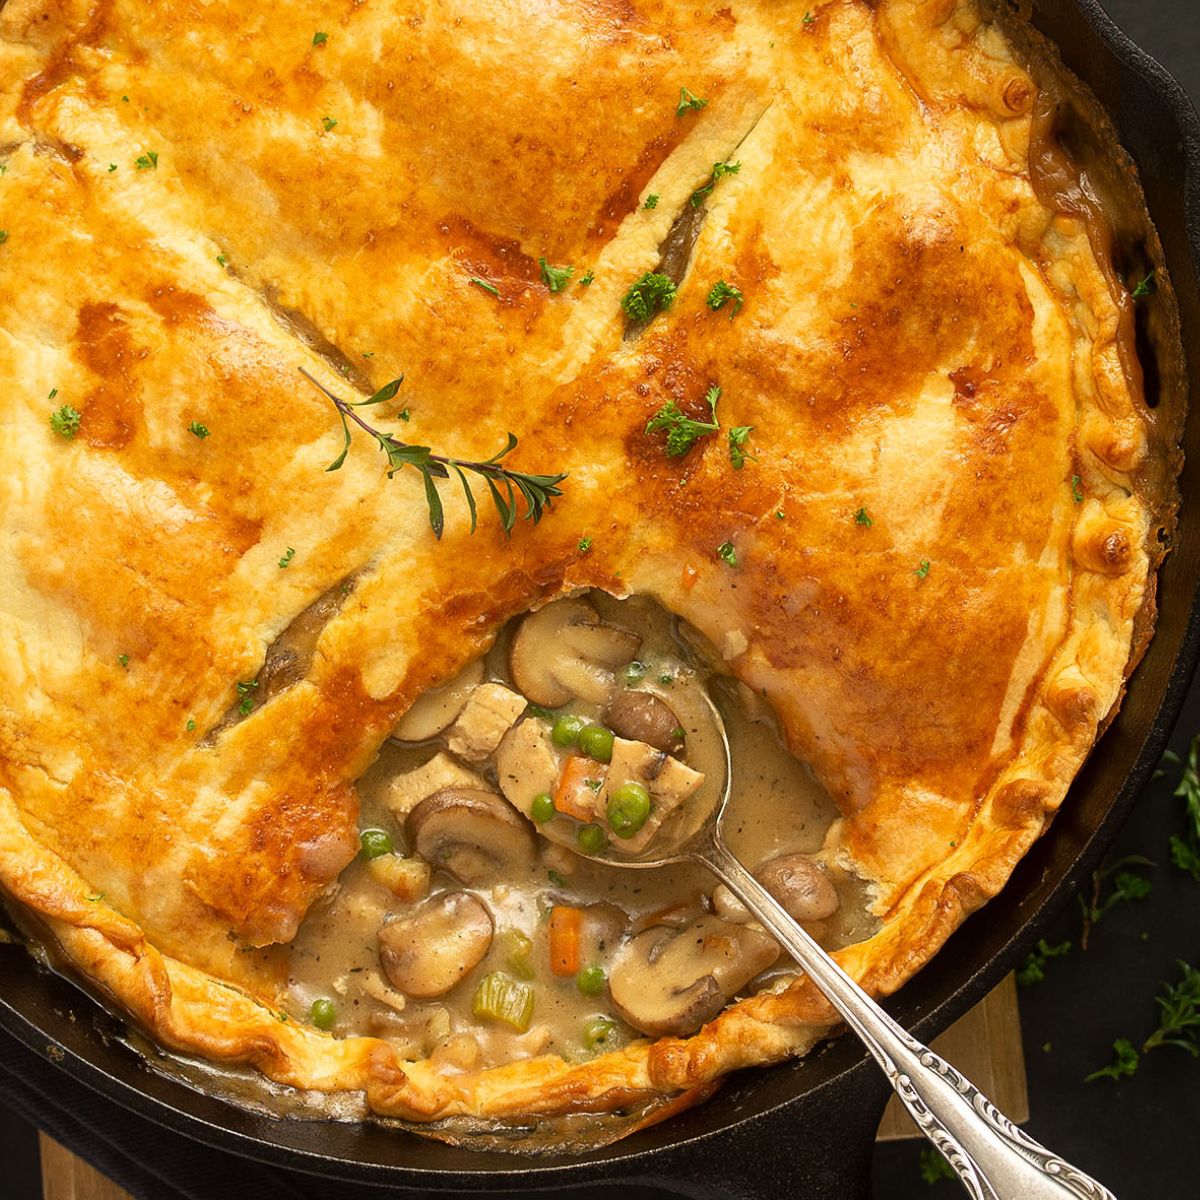 chicken pot pie in the cast iron skillet showing the creamy filling.